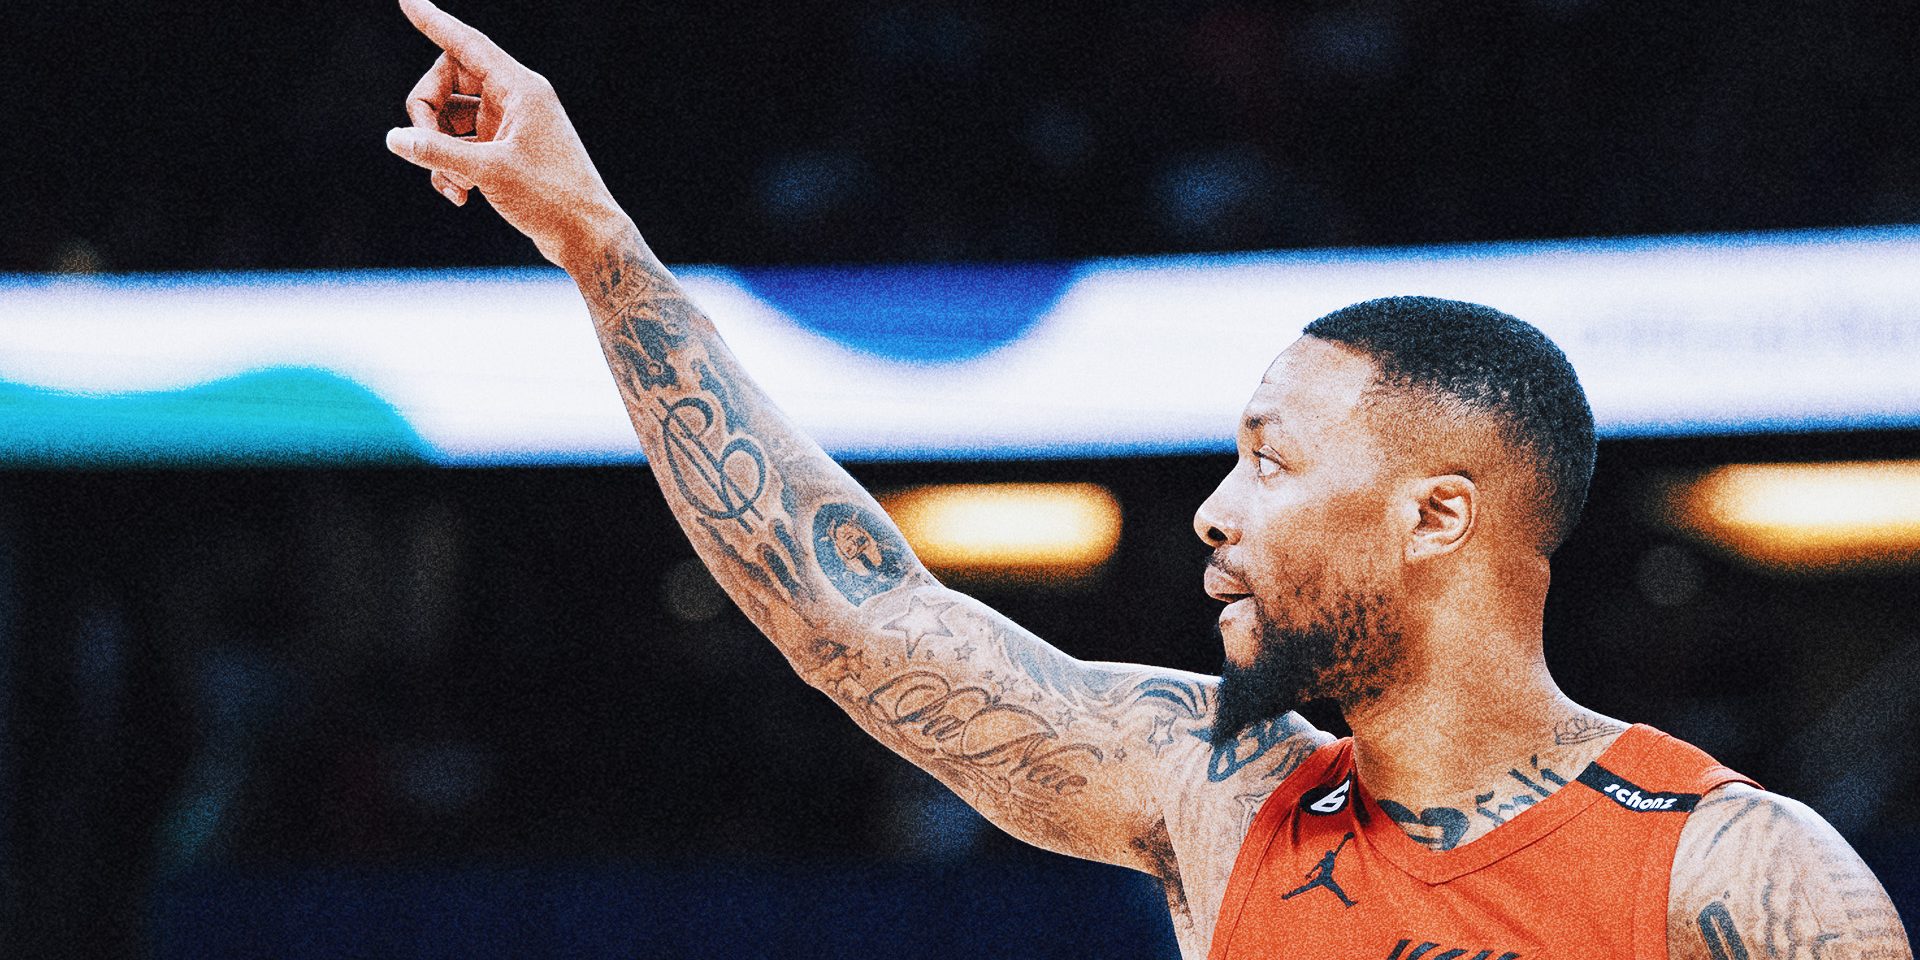 Damian Lillard wanted to rescind trade request if he didn't go to Heat; Trail Blazers refused